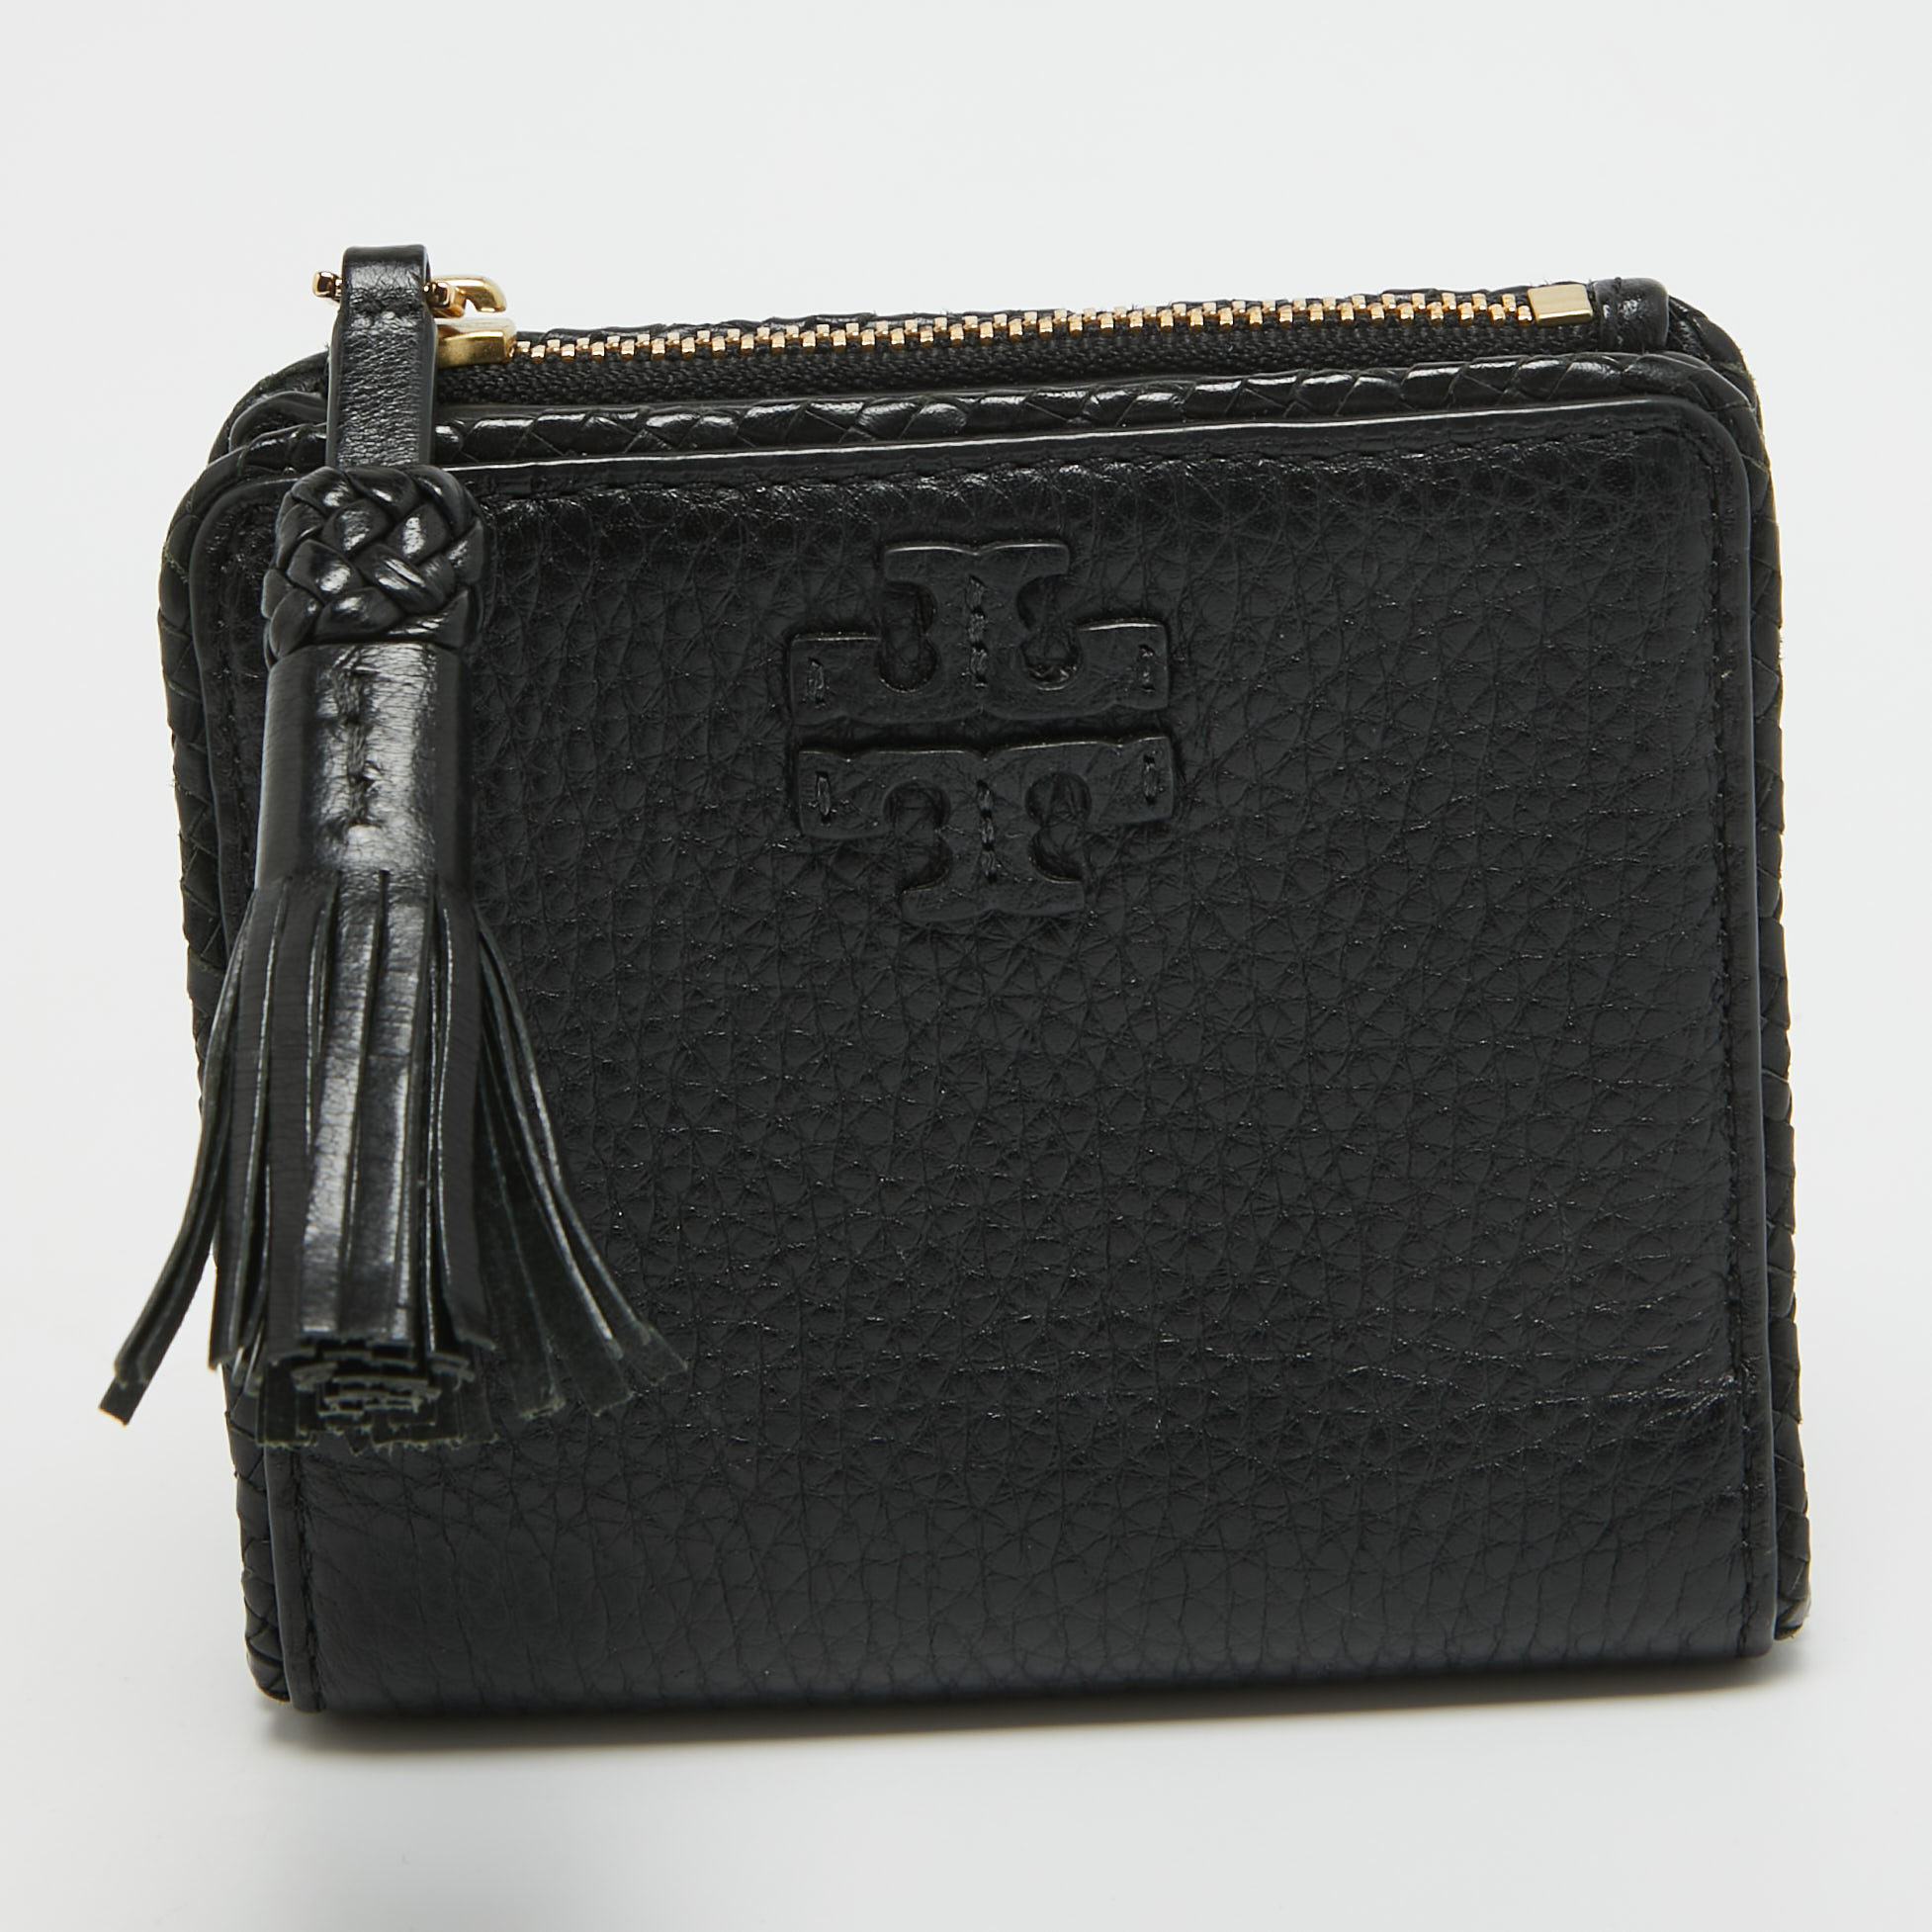 Tory burch black leather taylor bifold compact wallet